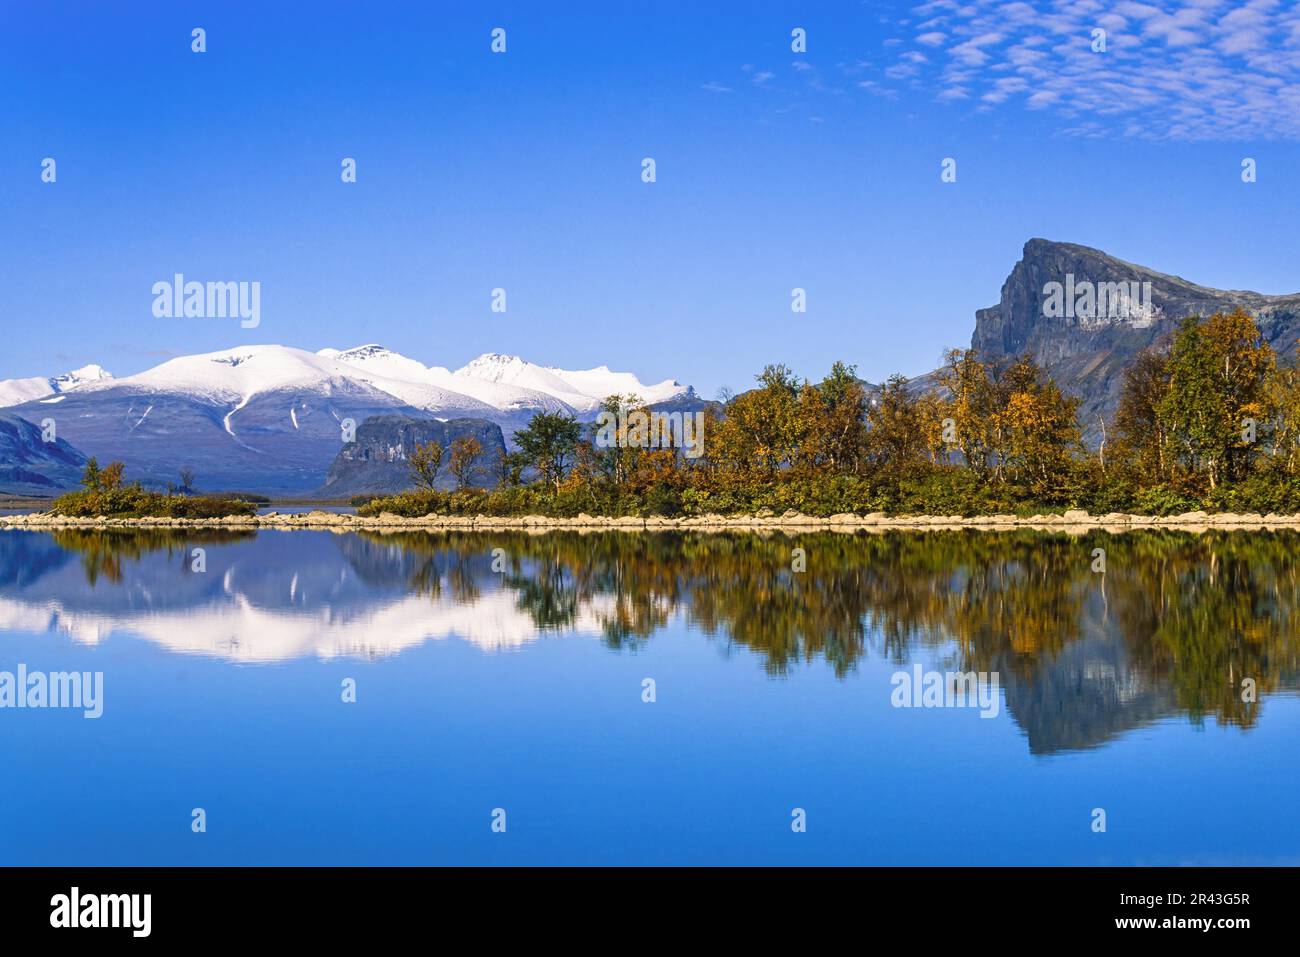 Scenic view at Lake Laitaure in rapa valley at Sarek national park with autumn colors and snow capped mountains, Kvikkjokk, Lapland, Sweden Stock Photo